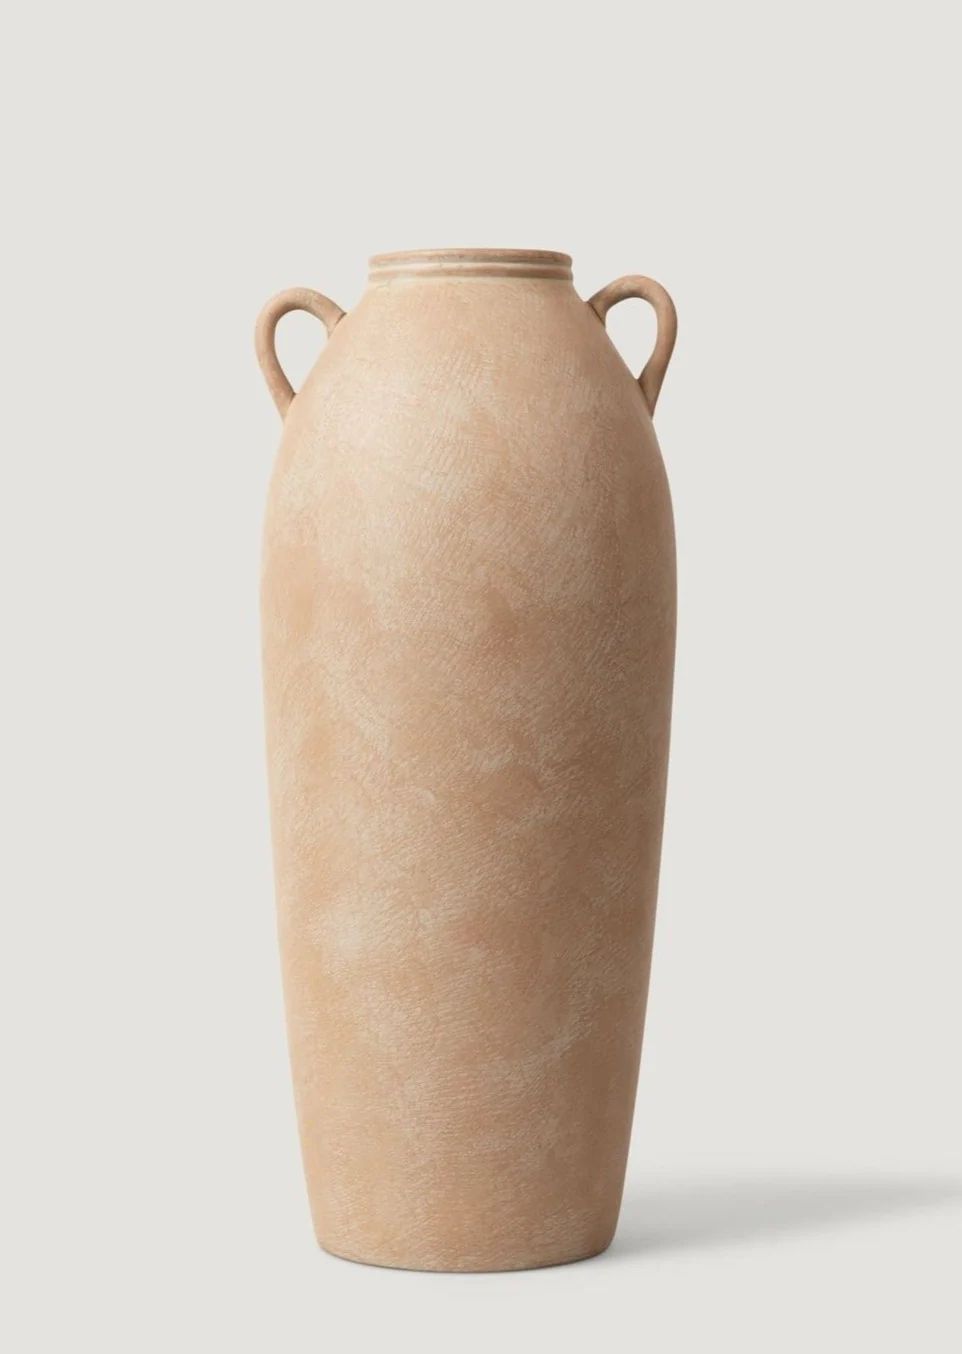 Tall Terra Cotta Vase with Handles | Extra Tall Vases at Afloral.com | Afloral